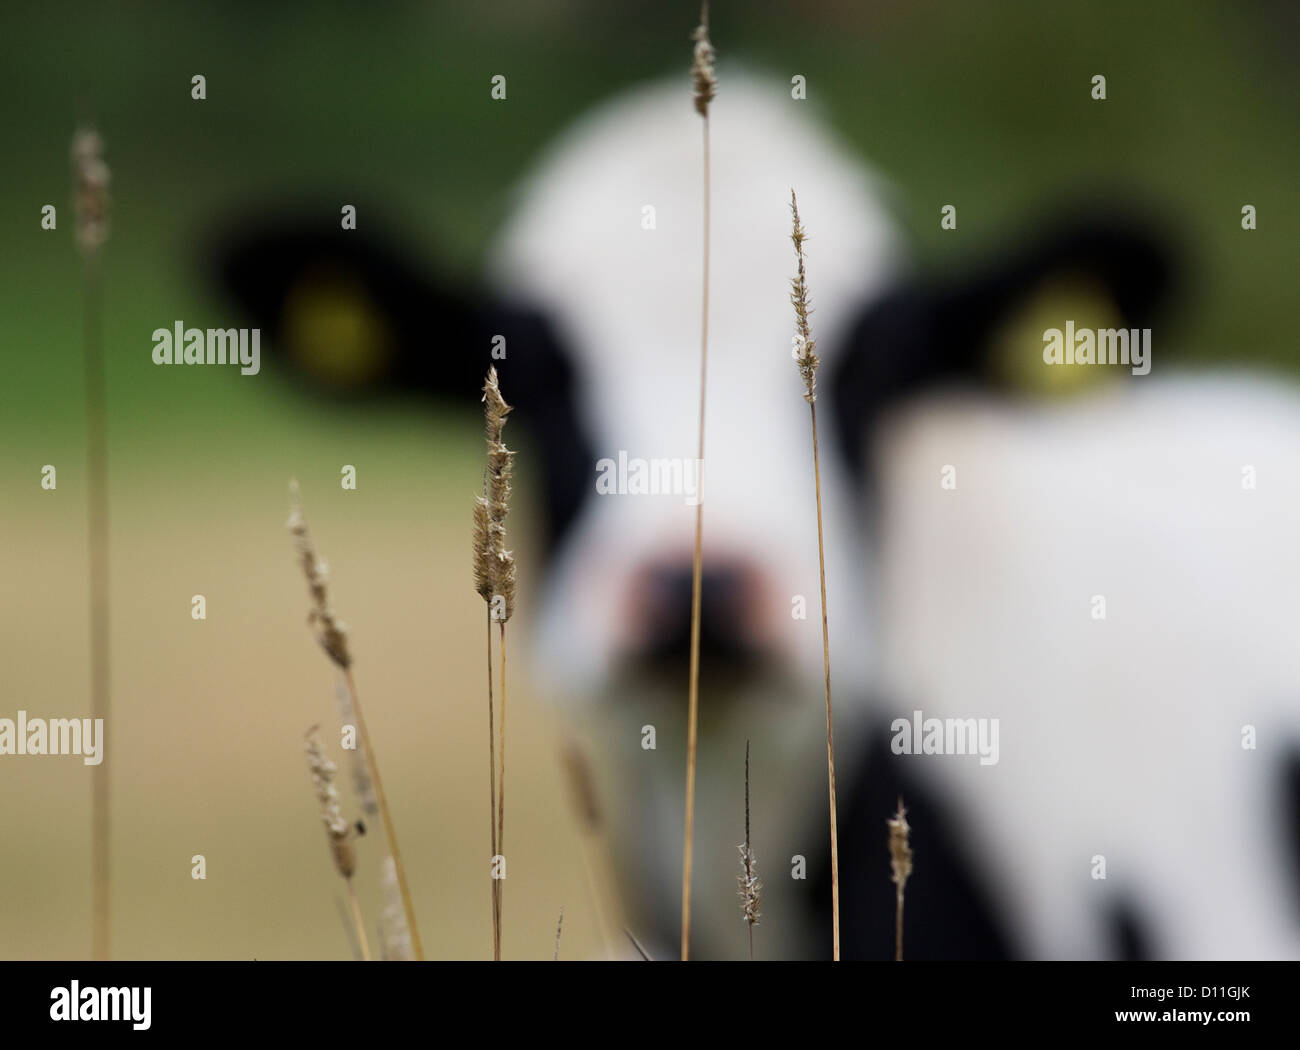 Black and white cow out of focus with focused grass in the foreground Stock Photo